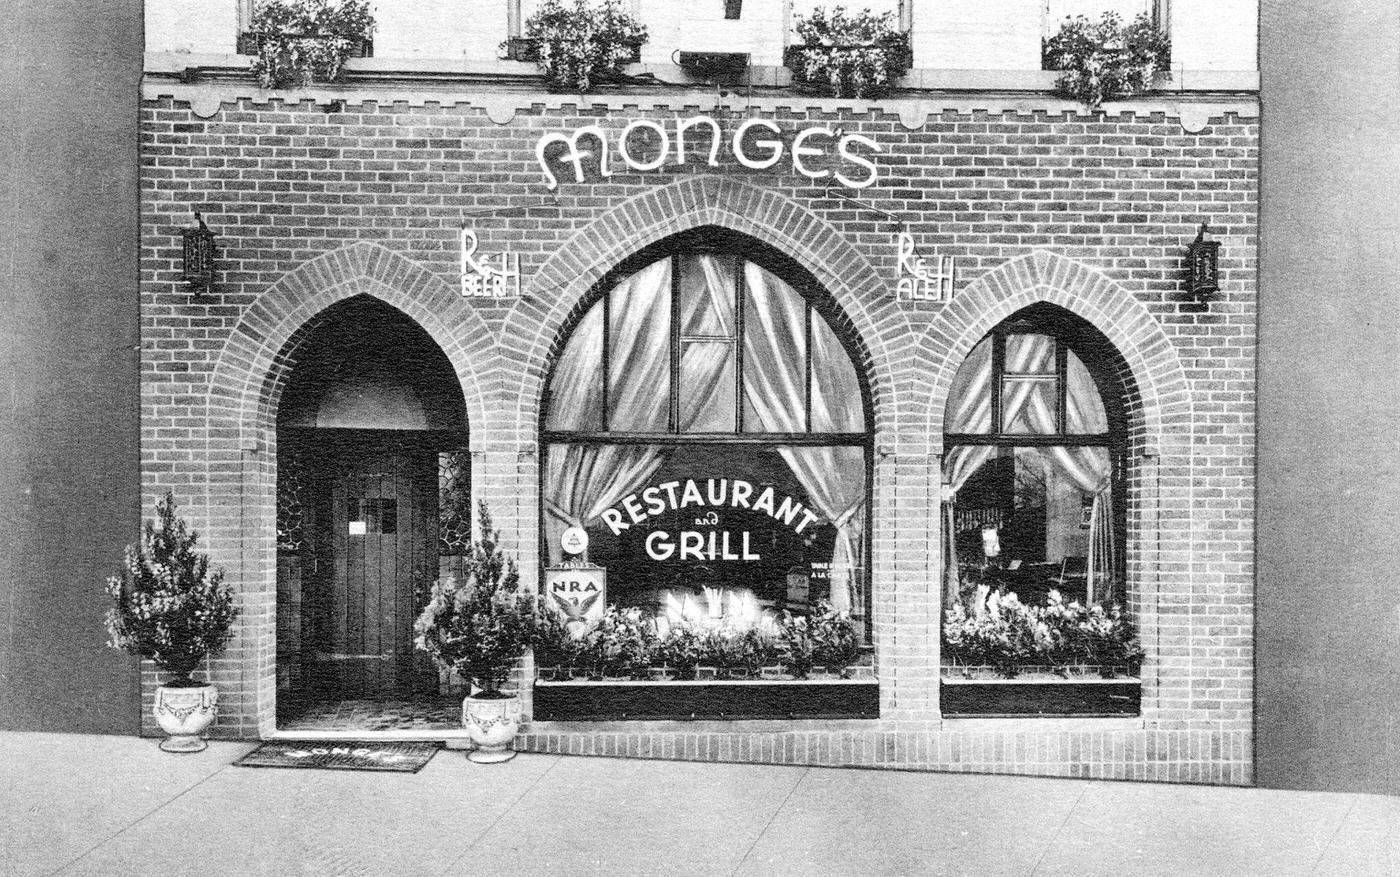 Exterior Of Monge'S Restaurant, Decorated With Potted Flowers And An Nra Sign, 1950.